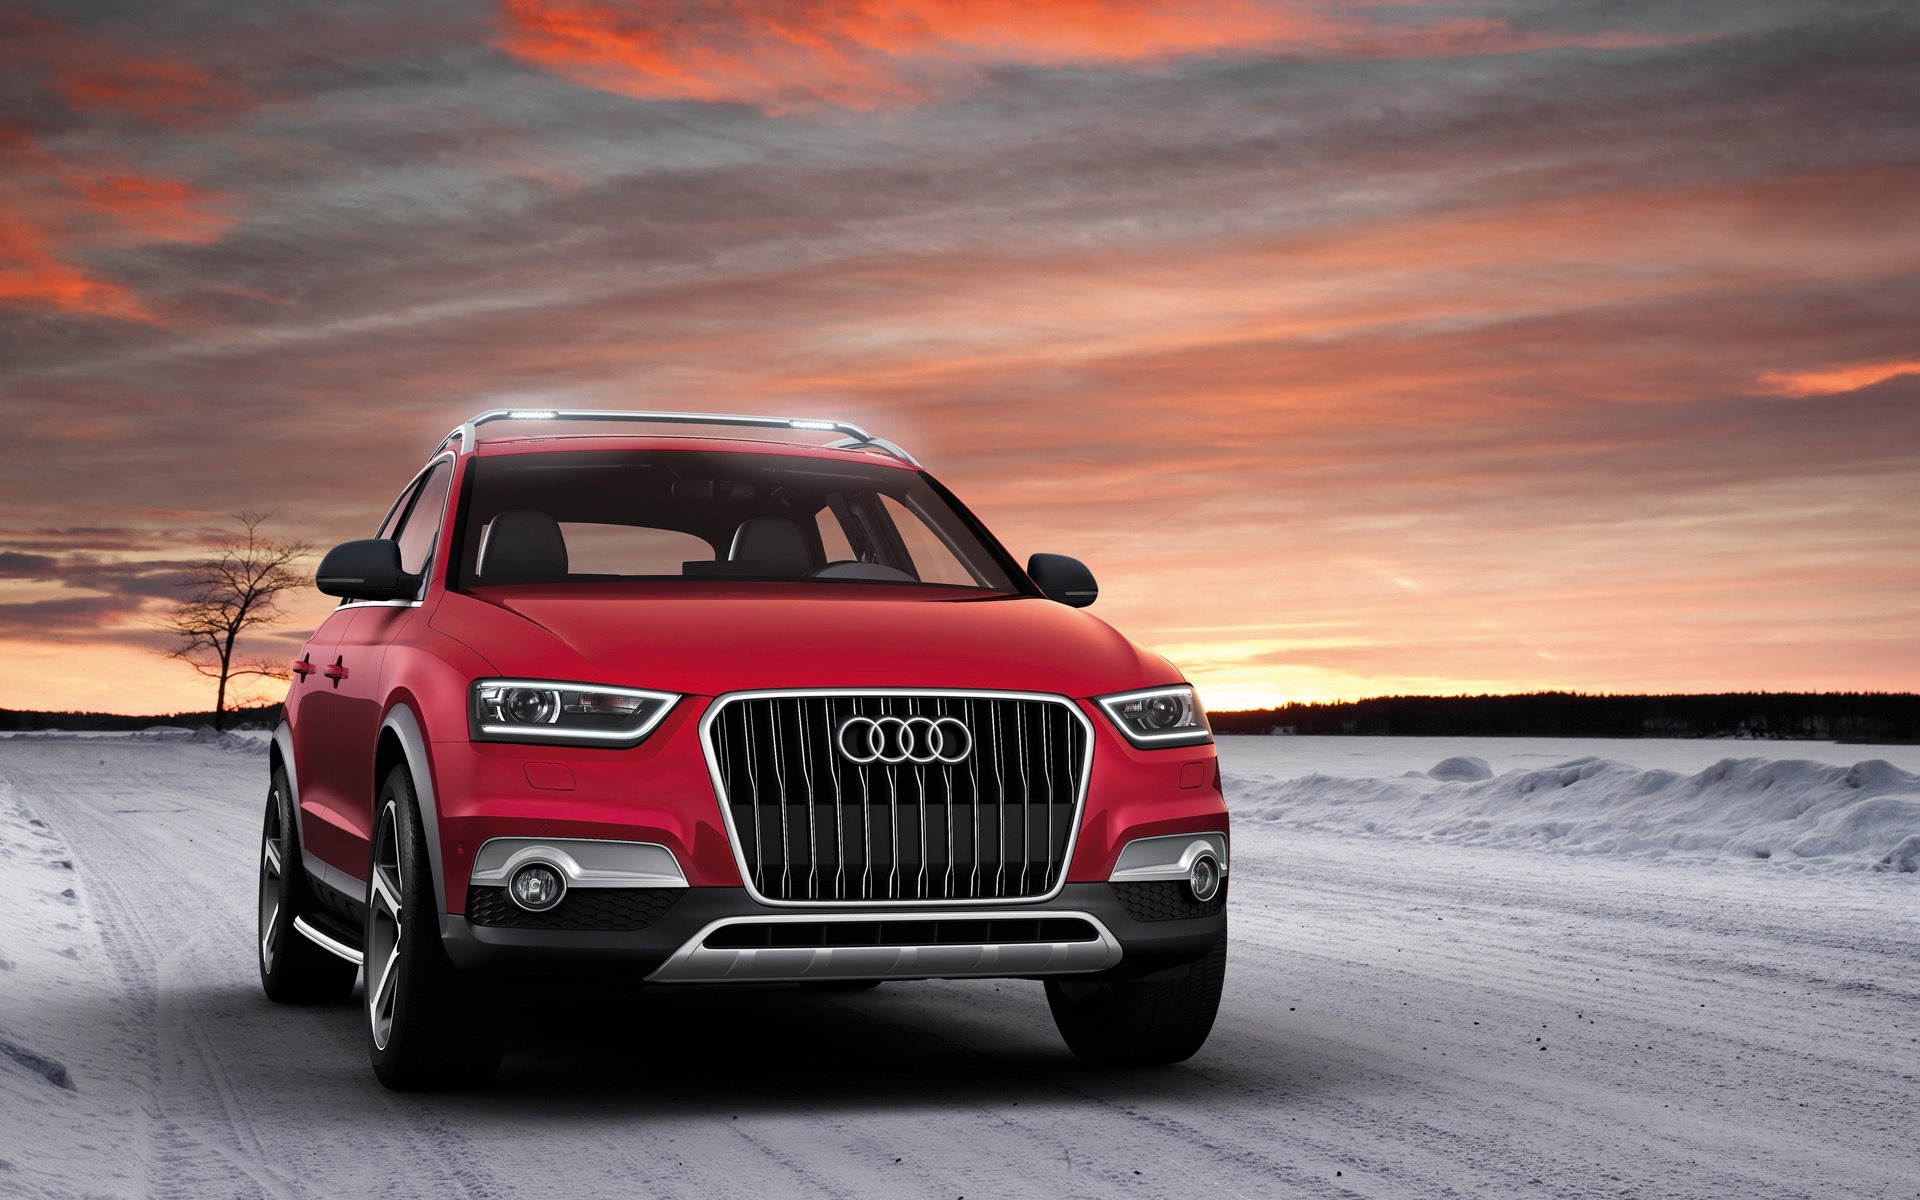 2012 Audi Q3 Vail Front for 1920 x 1200 widescreen resolution